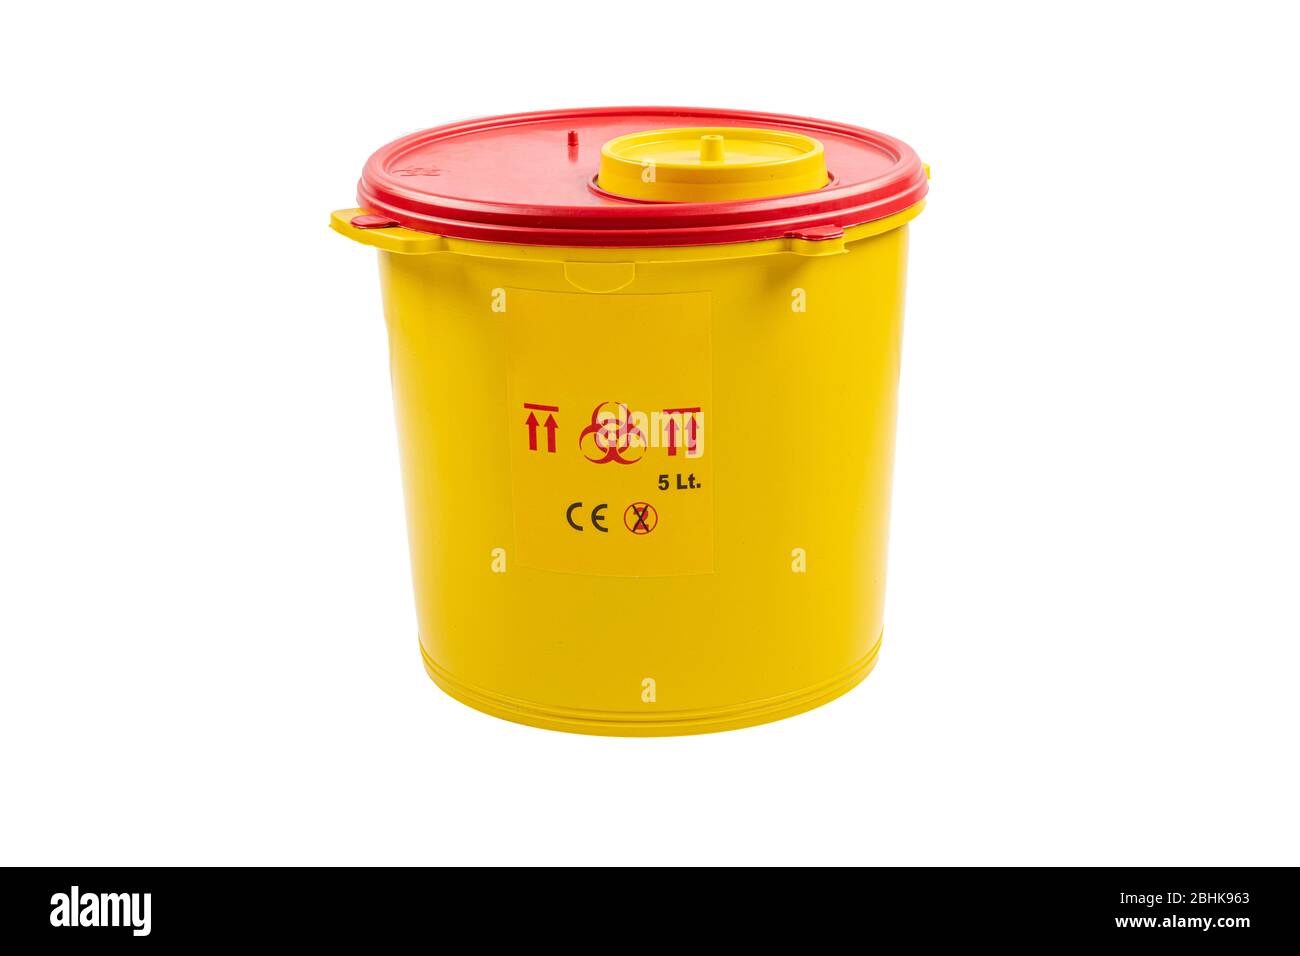 Medical Waste Rubbish Bins & Sharps Waste Management 5 liter. Yellow biohazard medical contaminated clinical waste container isolated on white backgro Stock Photo